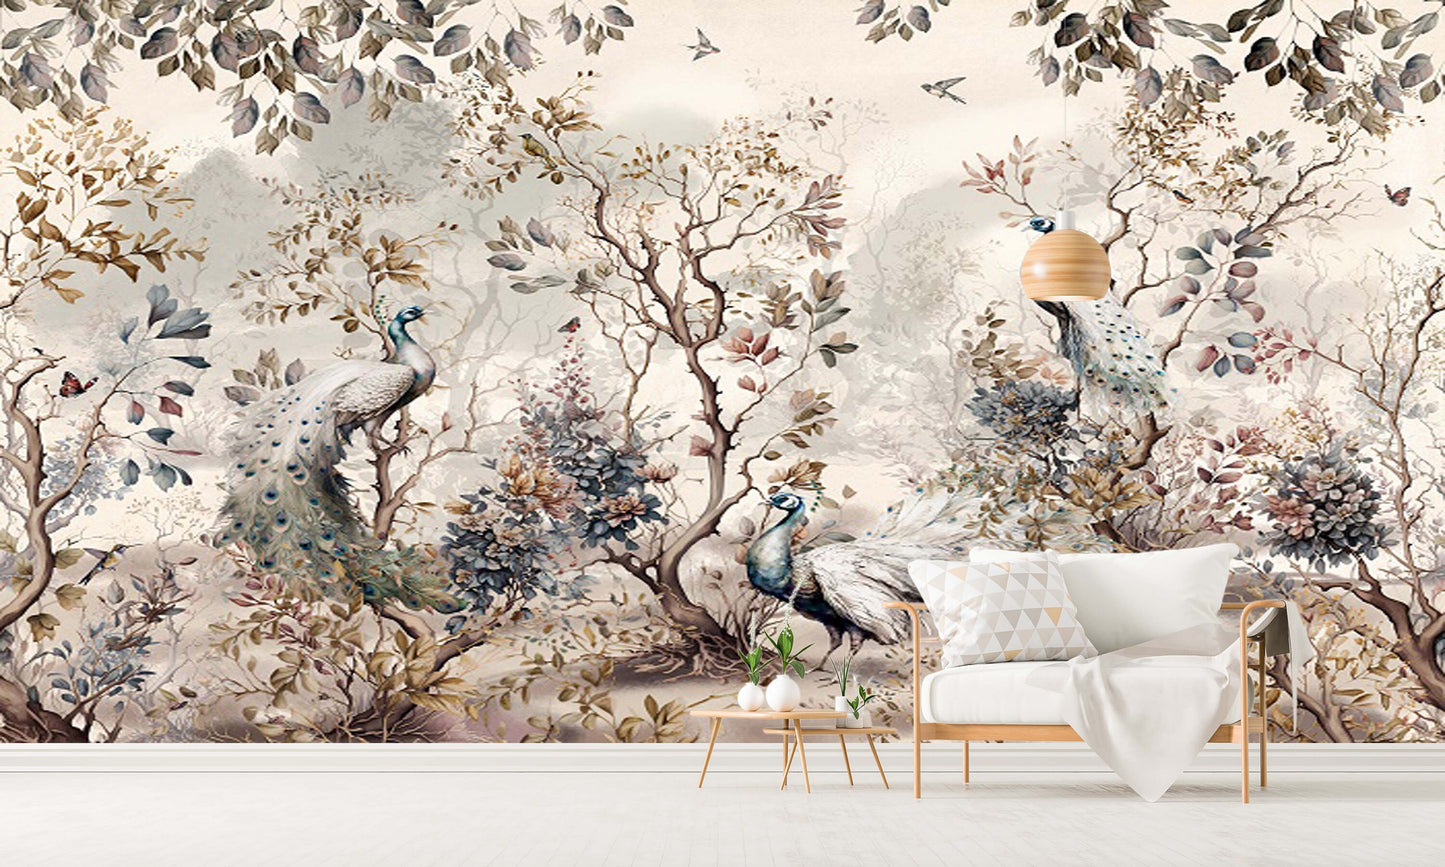 Botanical self adhesive wallpaper, peel and stick wall mural with peacocks, large accentual nature wallpaper, removable canvas wall mural